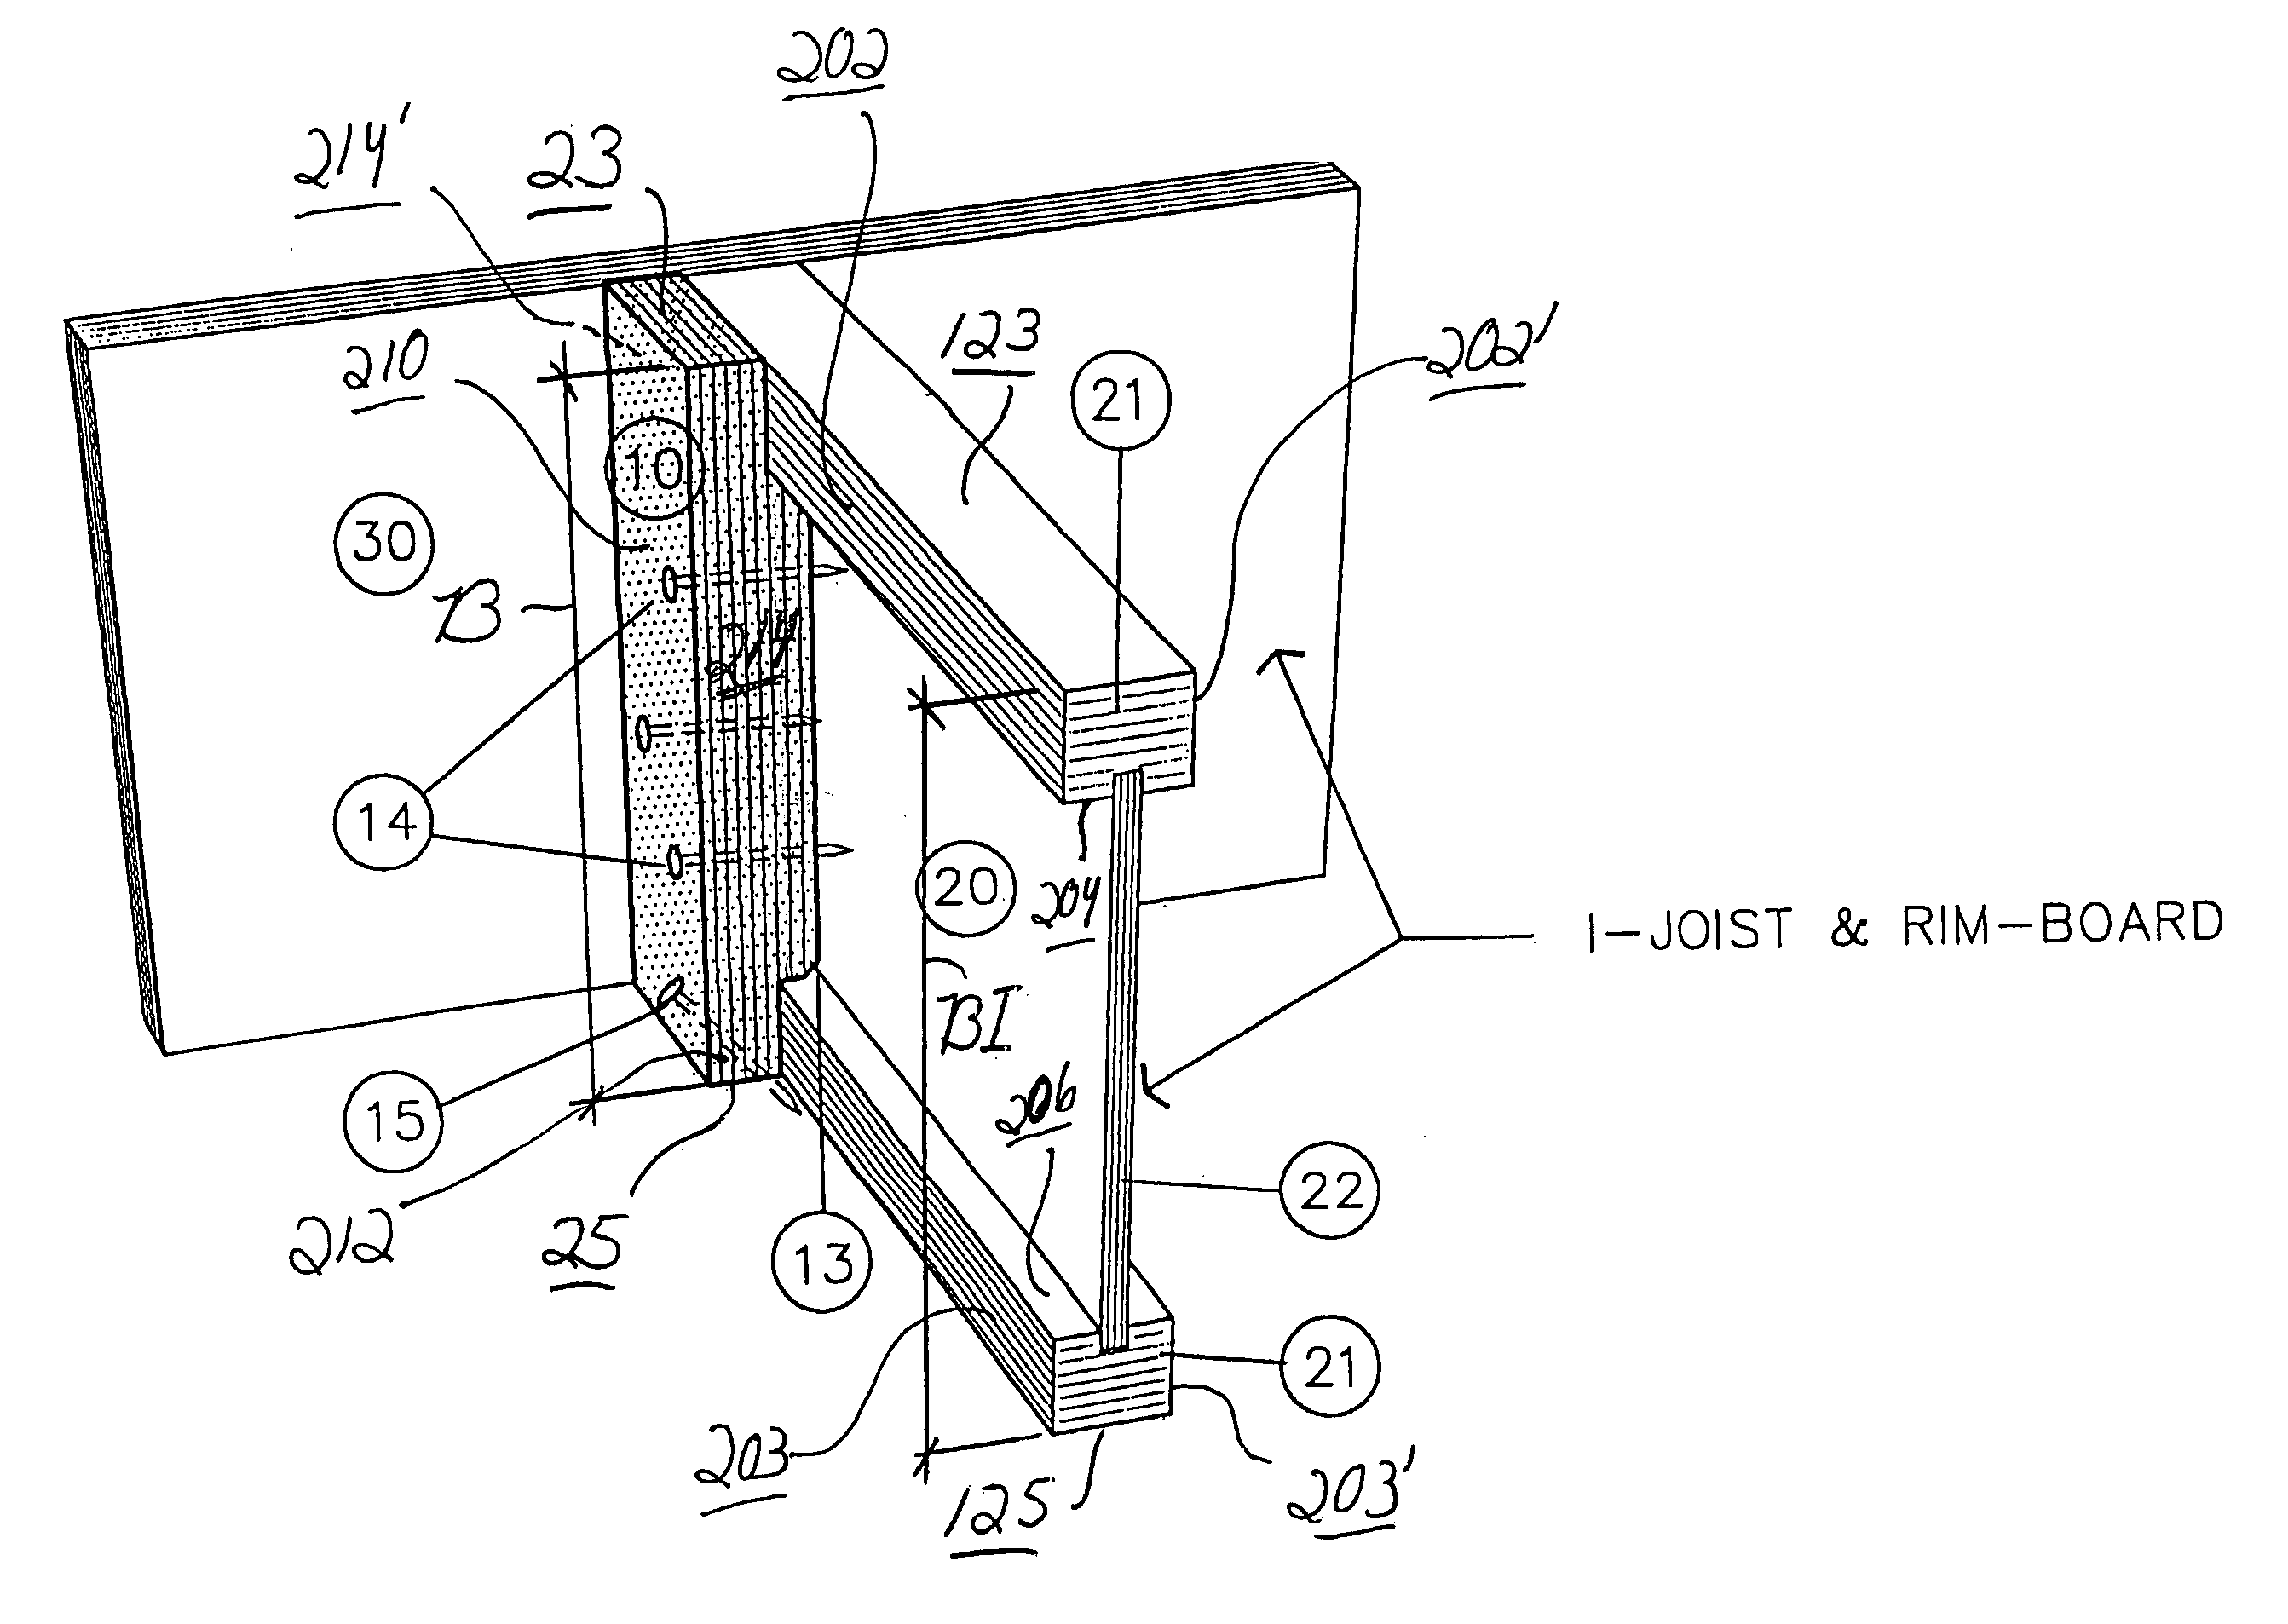 Prefabricated multi-purpose support block for use with I-joists